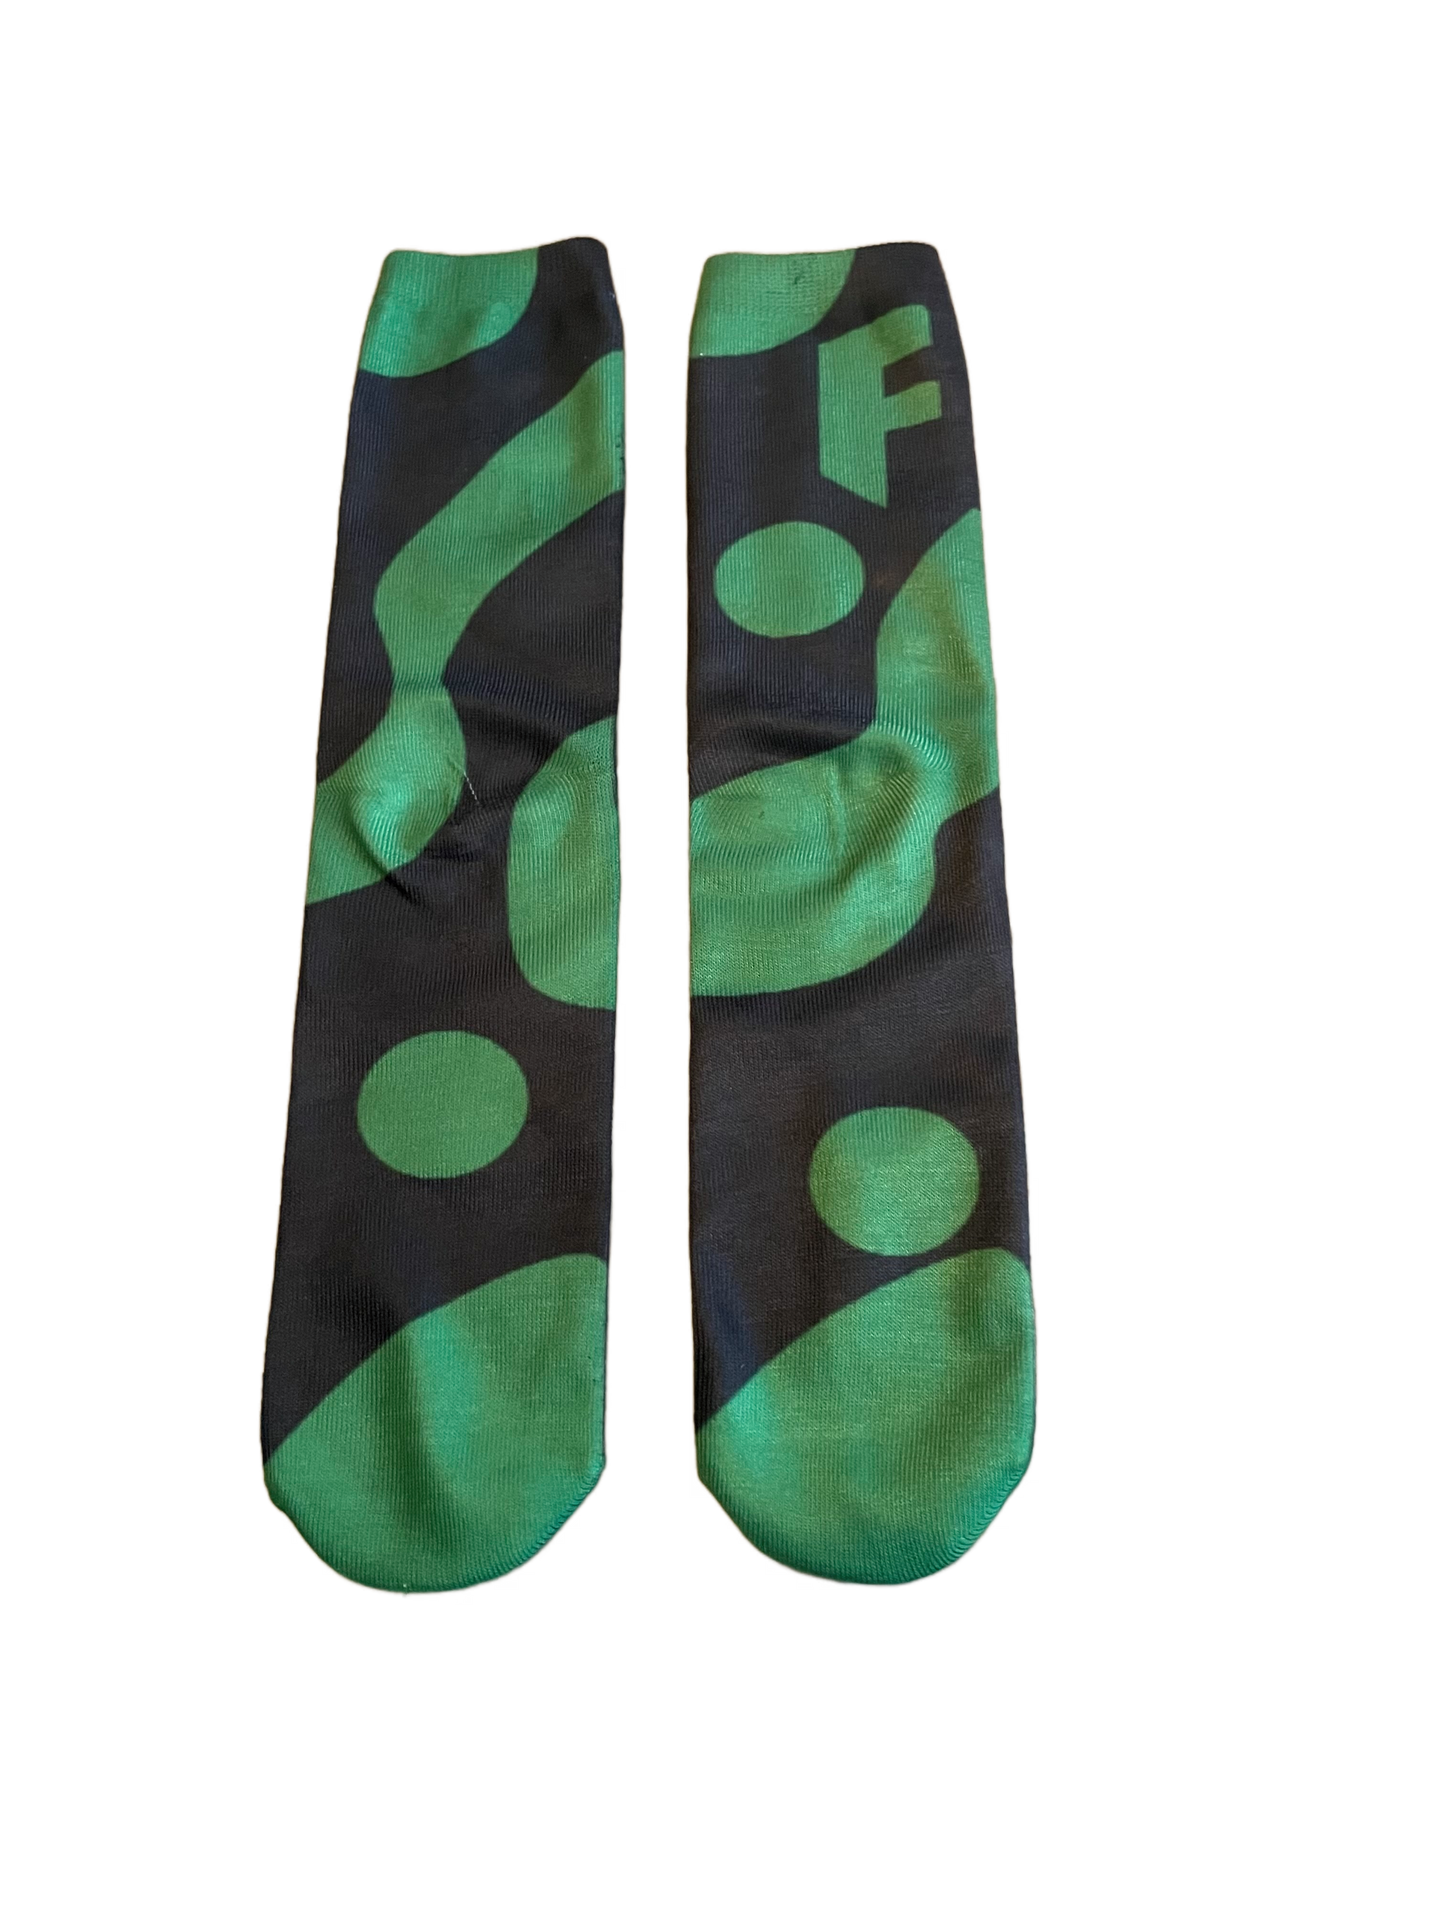 Fearce Adult Socks “That kind of day”